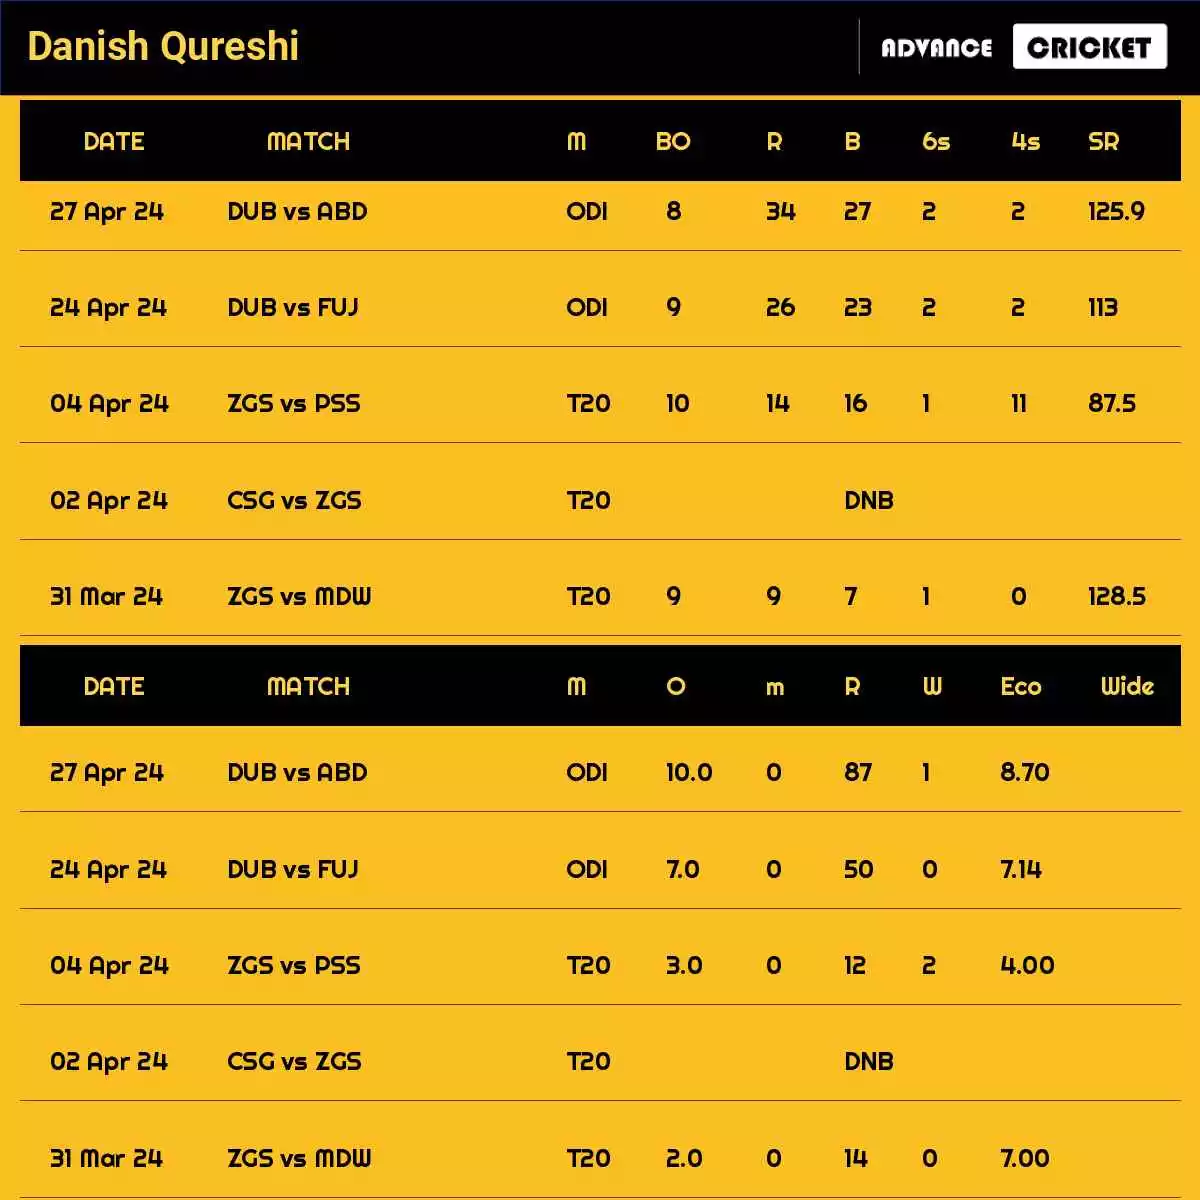 Danish Qureshi Recent Matches Details Date Wise